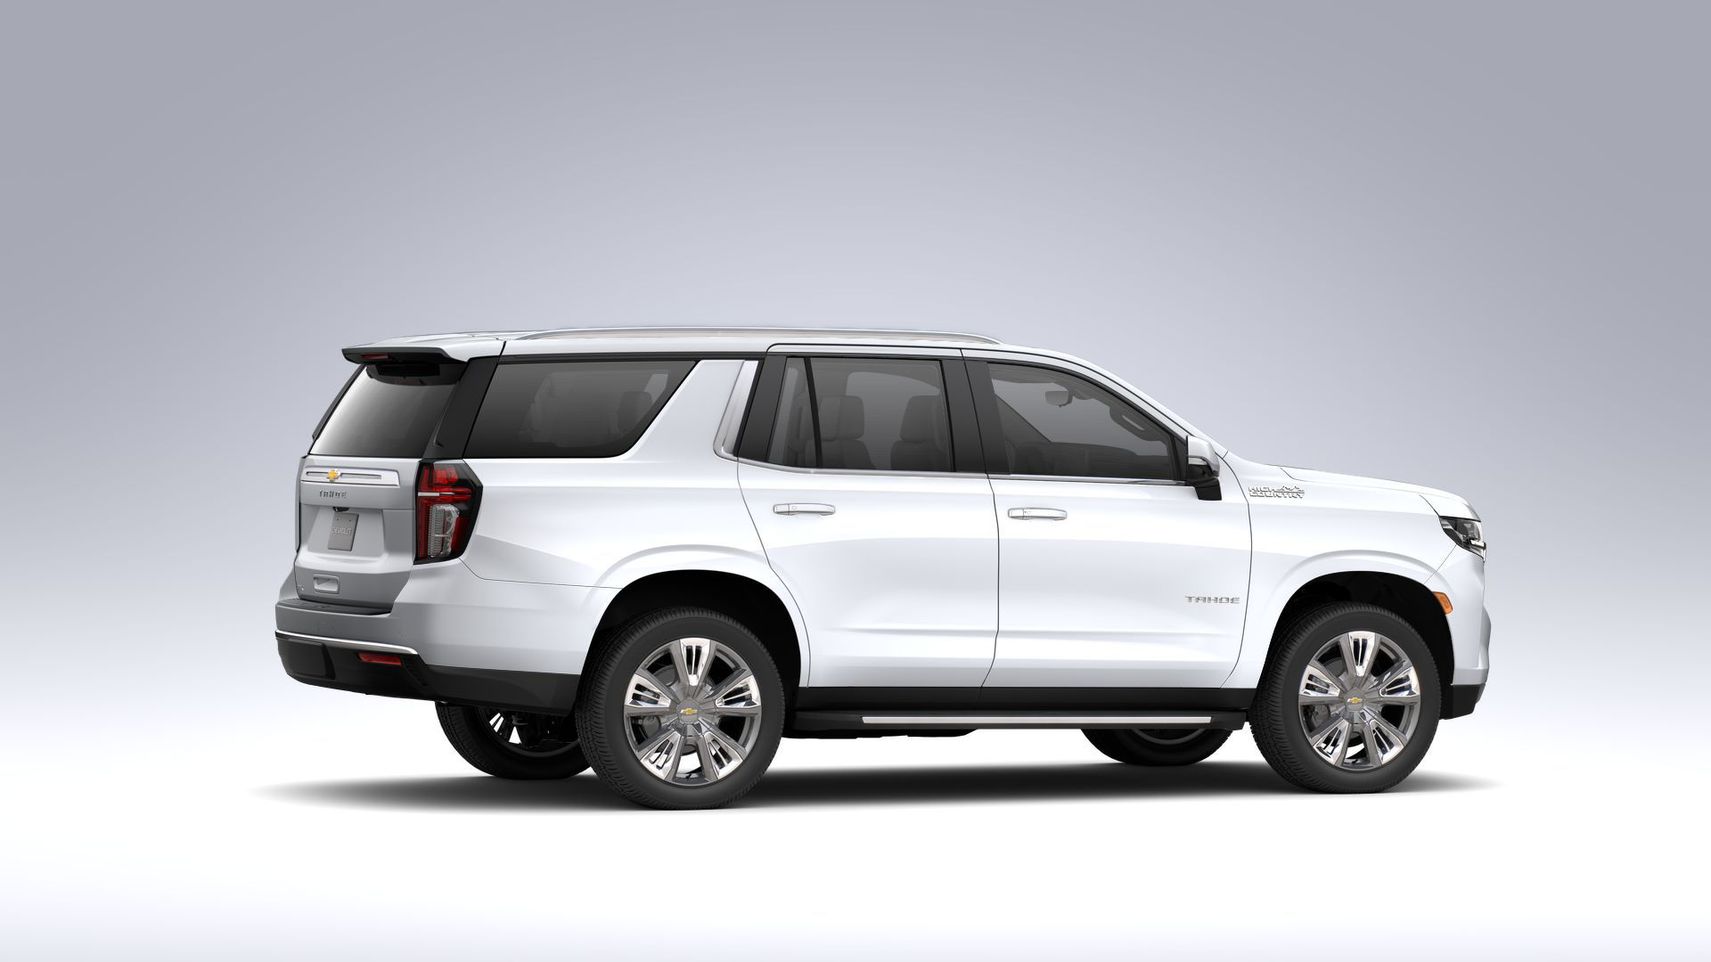 Chevrolet Tahoe High Country 2022